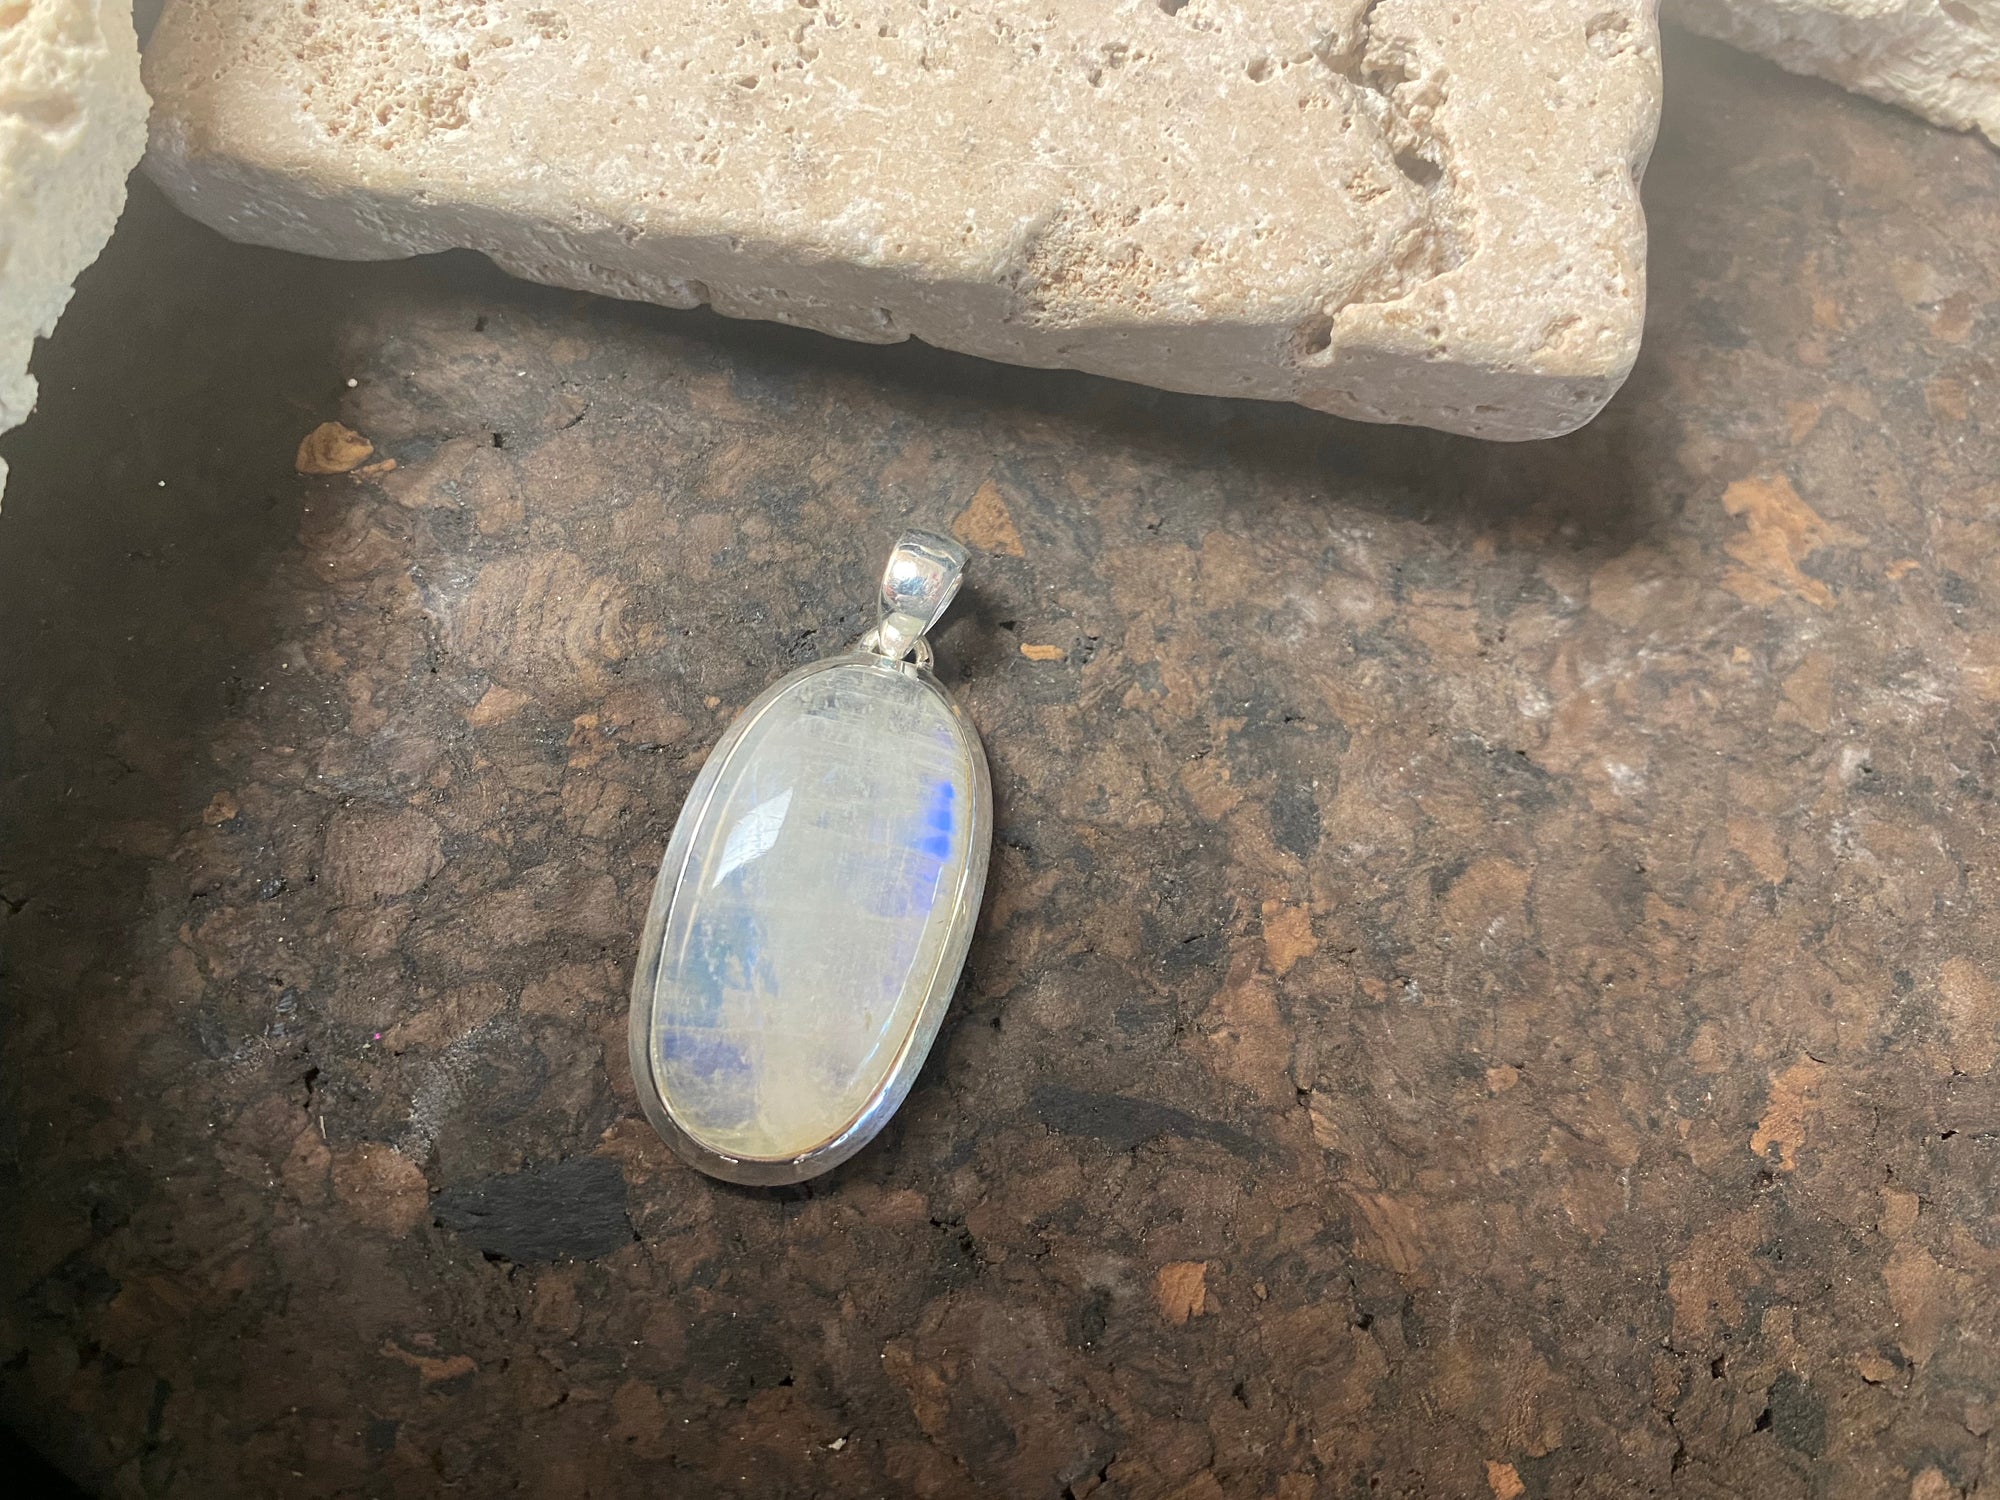 Stunning large rainbow moonstone pendant in sterling silver, 4.2 cm length